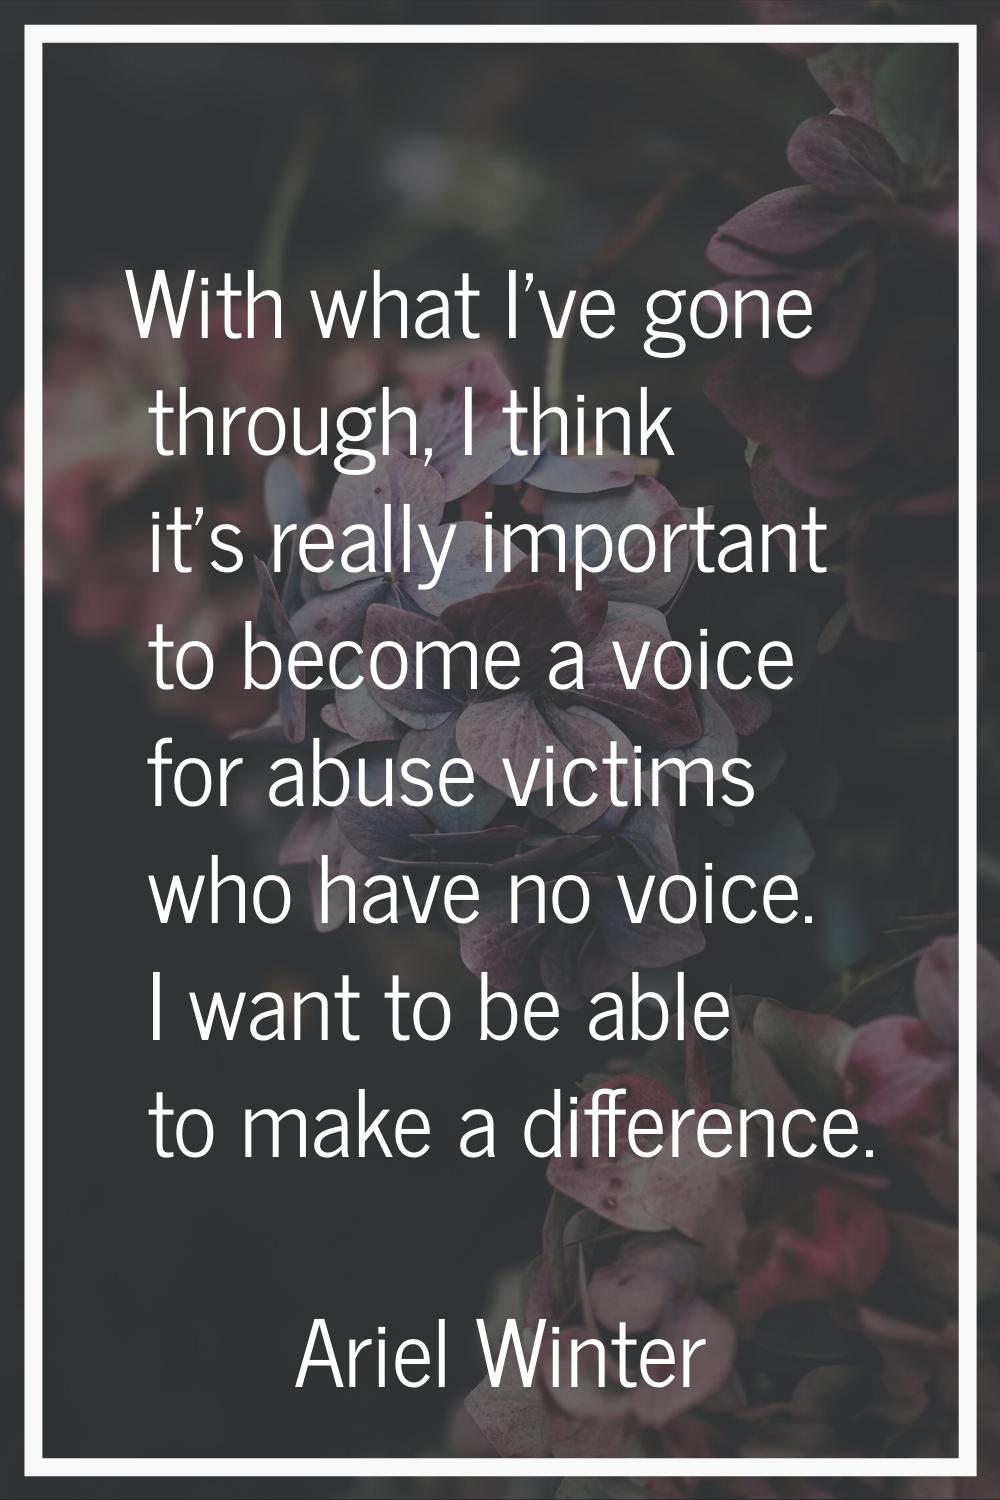 With what I've gone through, I think it's really important to become a voice for abuse victims who 